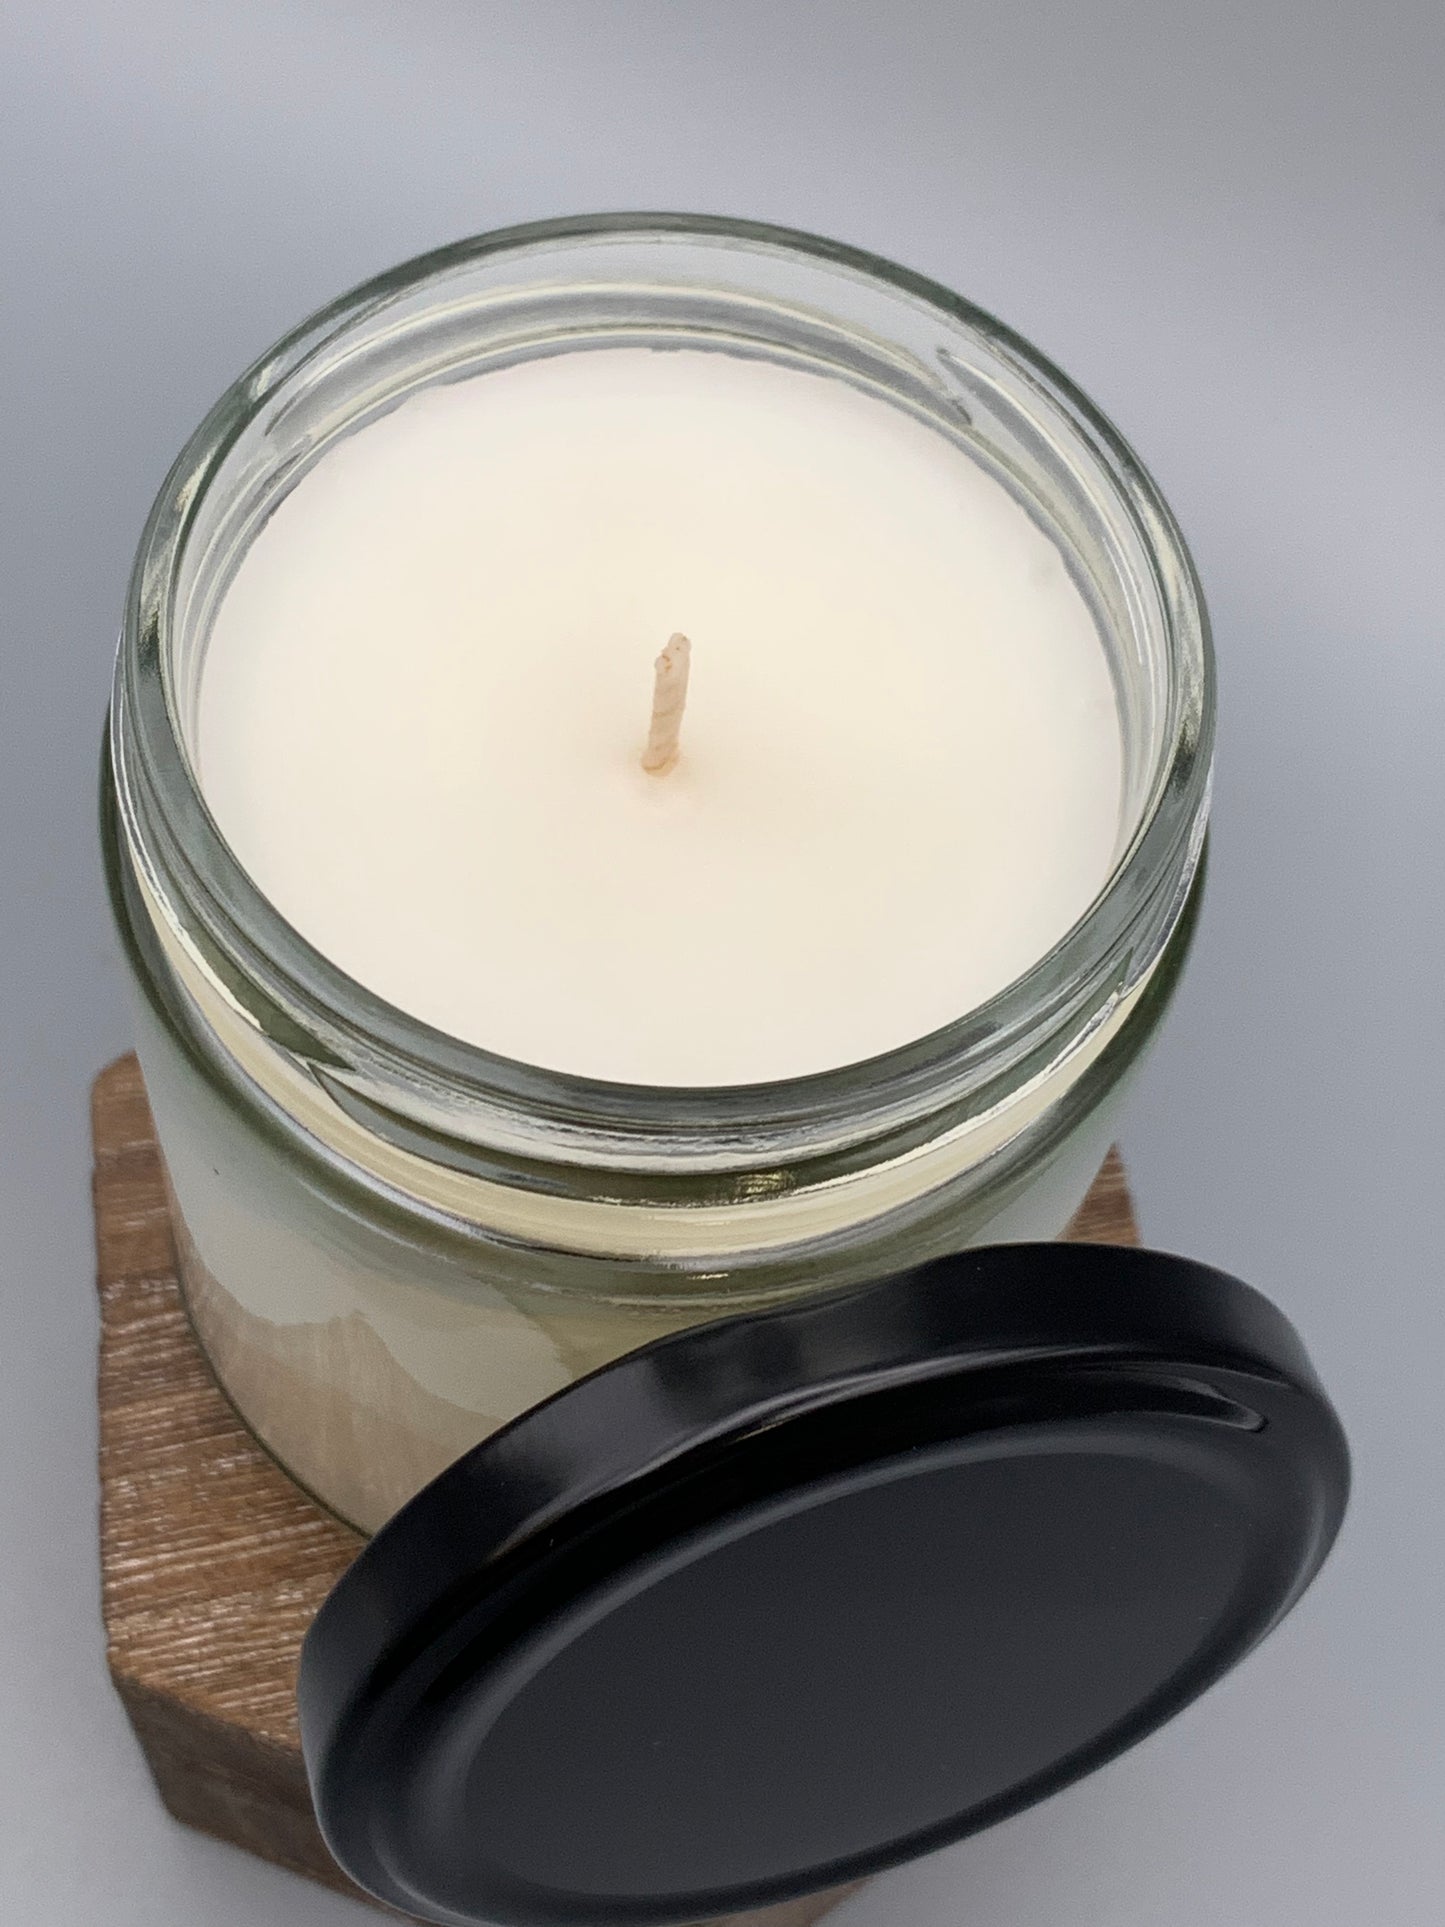 Mom's last nerve. Oh look, it's on fire. 9oz Soy Blend Candle